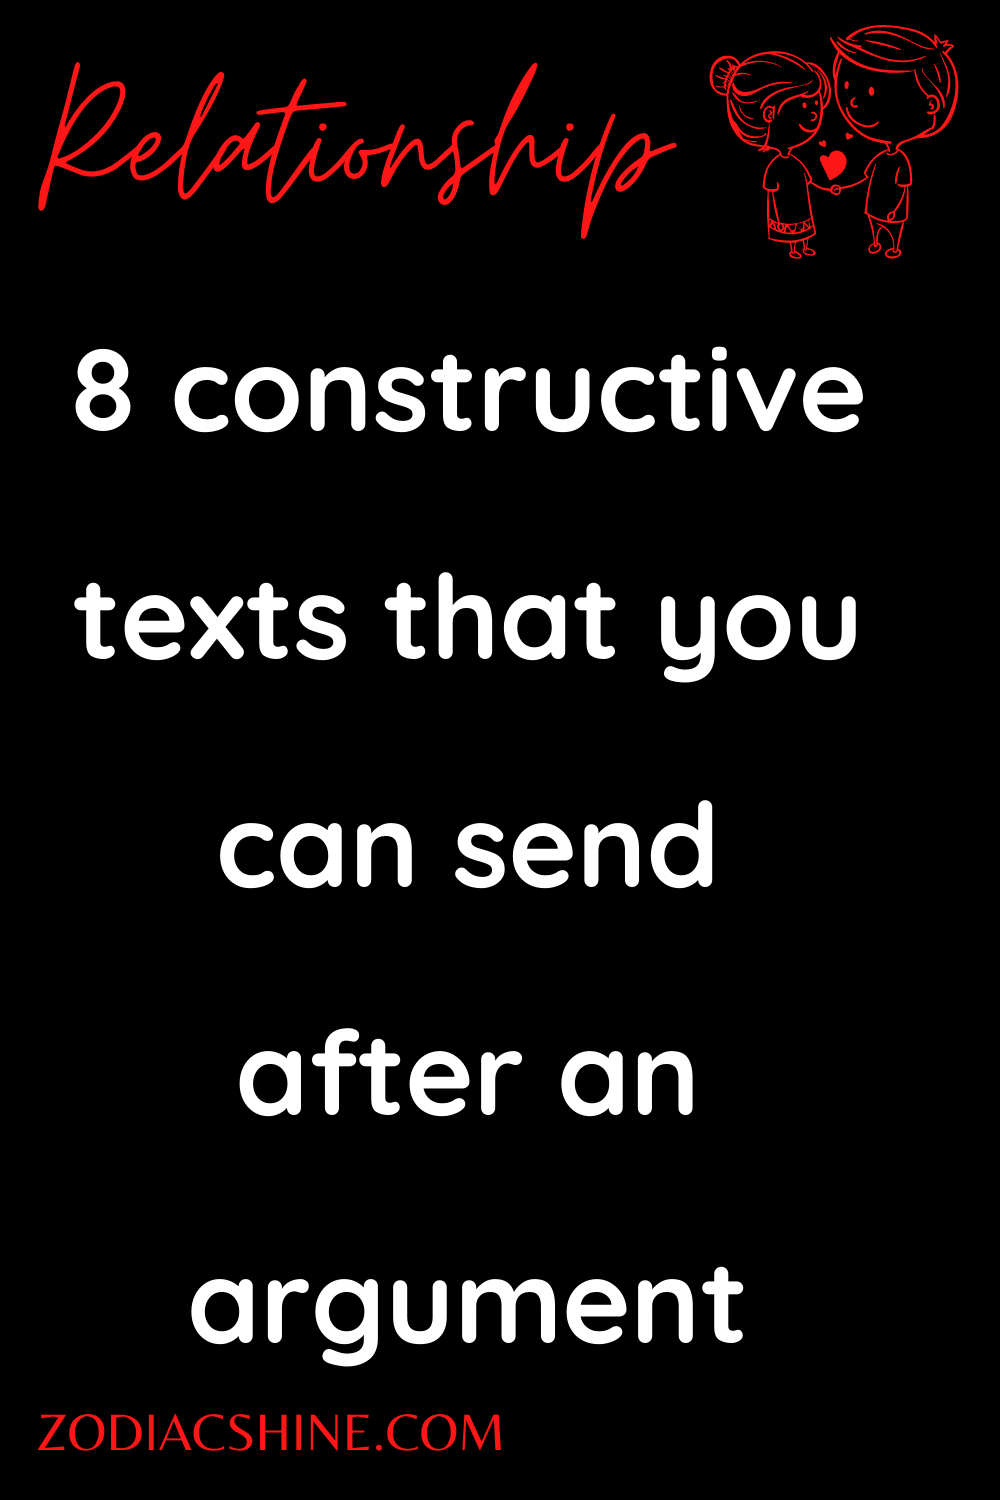 8 constructive texts that you can send after an argument